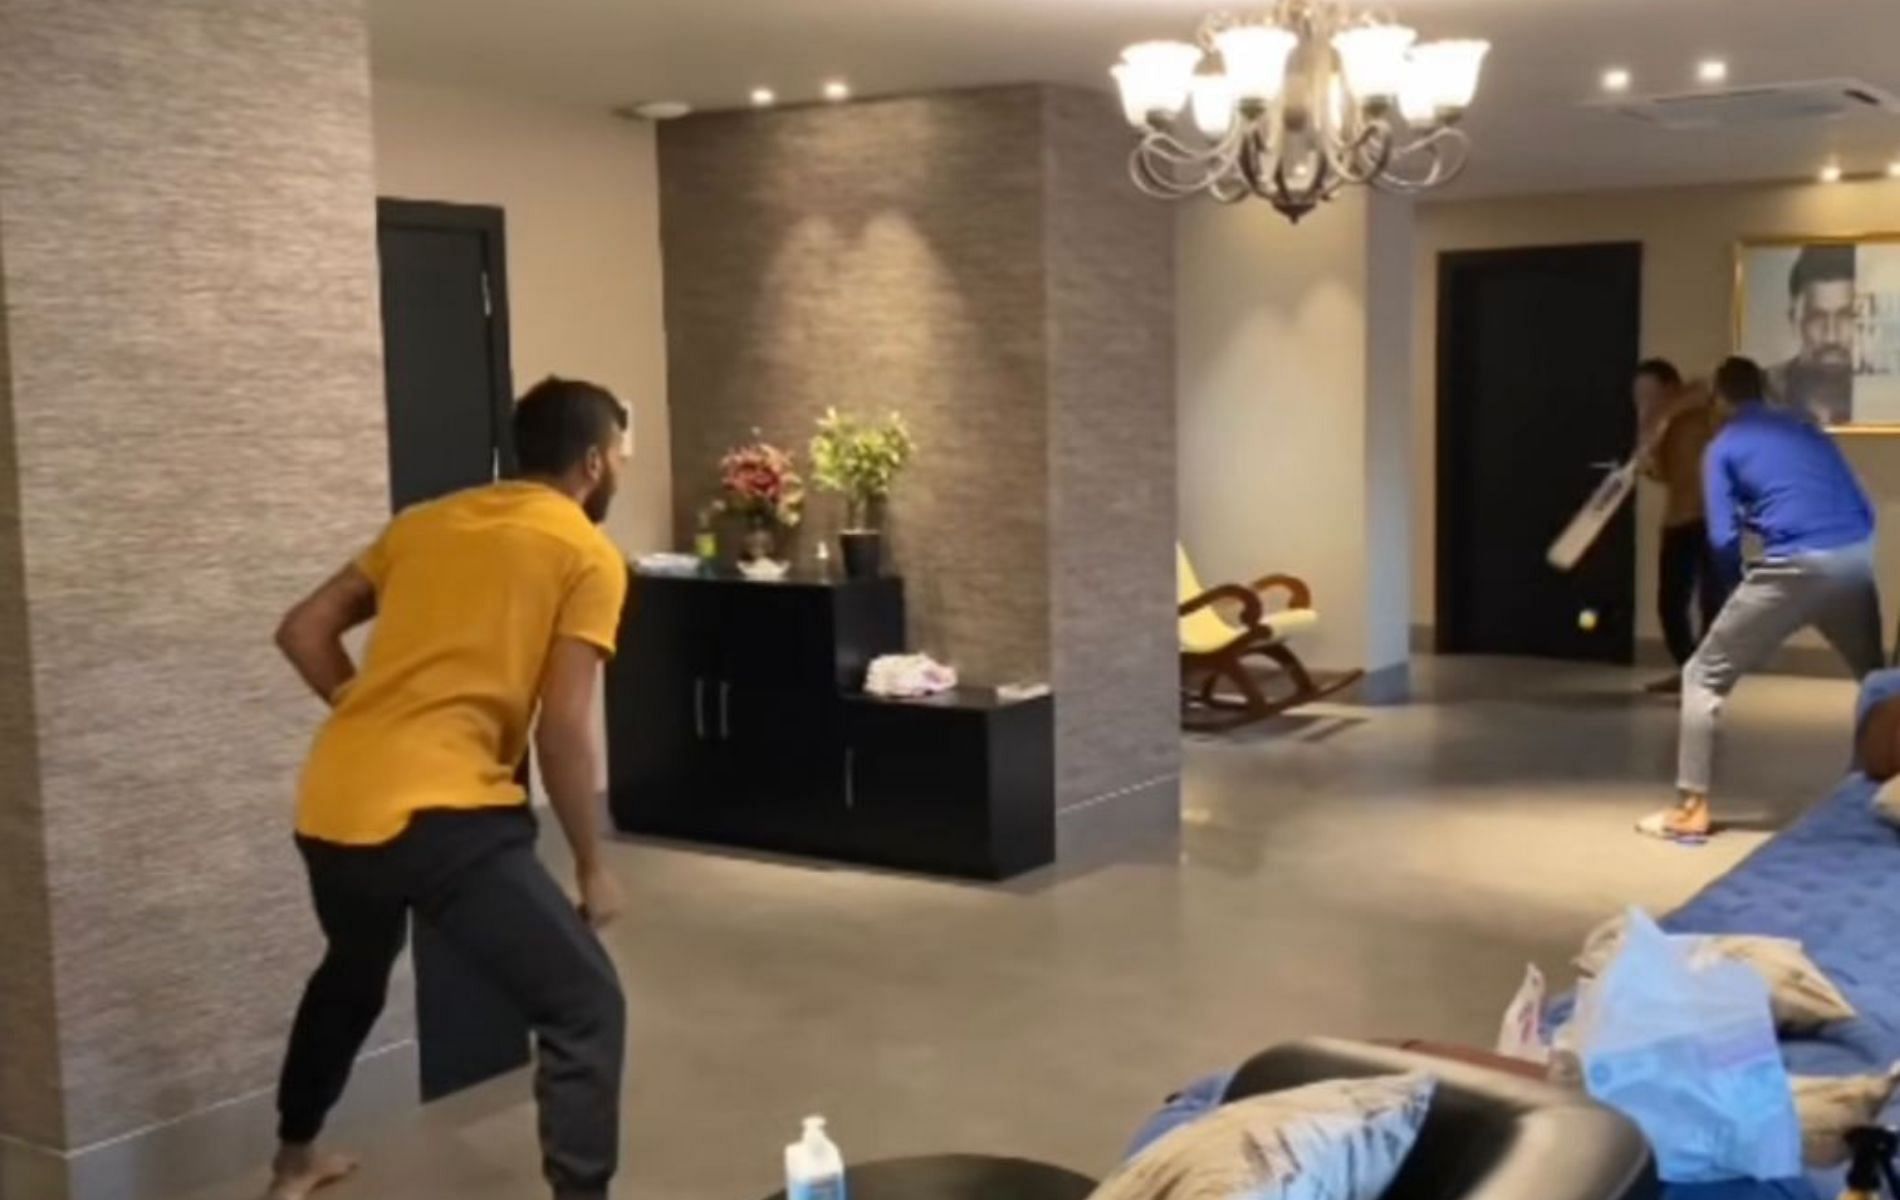 Pandya family enjoying a game of cricket at their home. (Pic: Instagram)